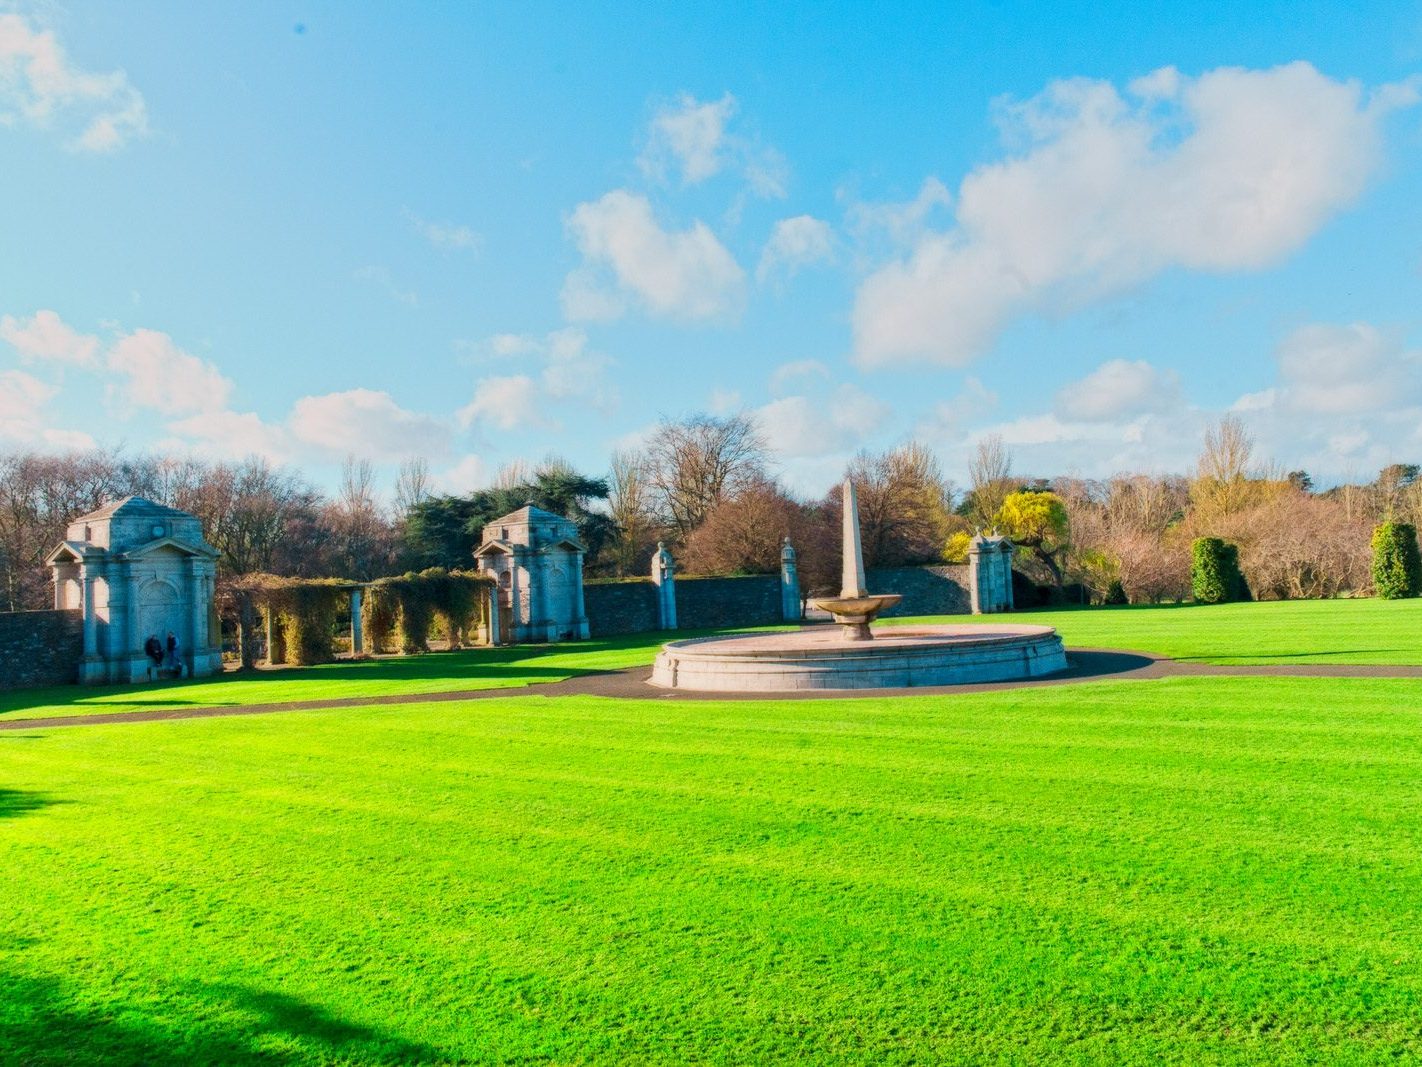 TODAY I VISITED THE IRISH NATIONAL WAR MEMORIAL GARDENS [ON THE SOUTH BANK OF THE RIVER LIFFEY]-223117-1